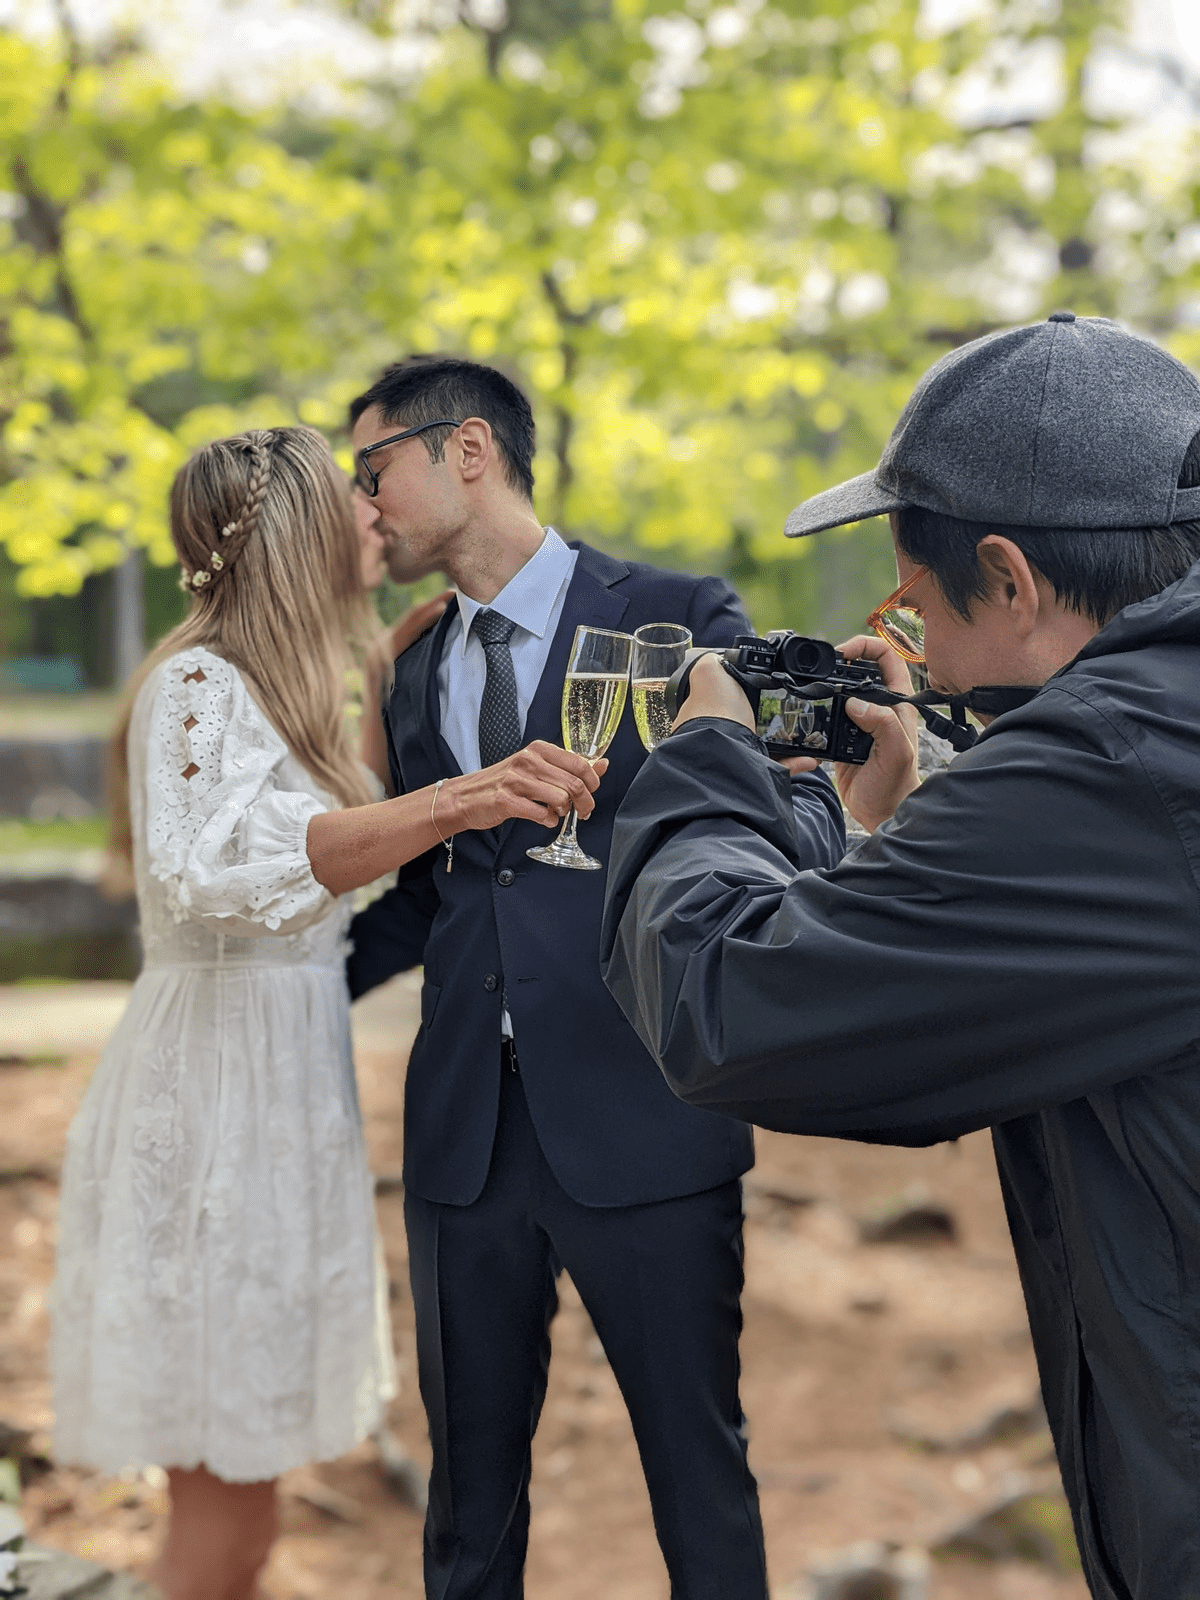 A photographer (Tyler Colburne) takes a picture of a person in a white dress and a person in a suit kissing while cheersing glasses.